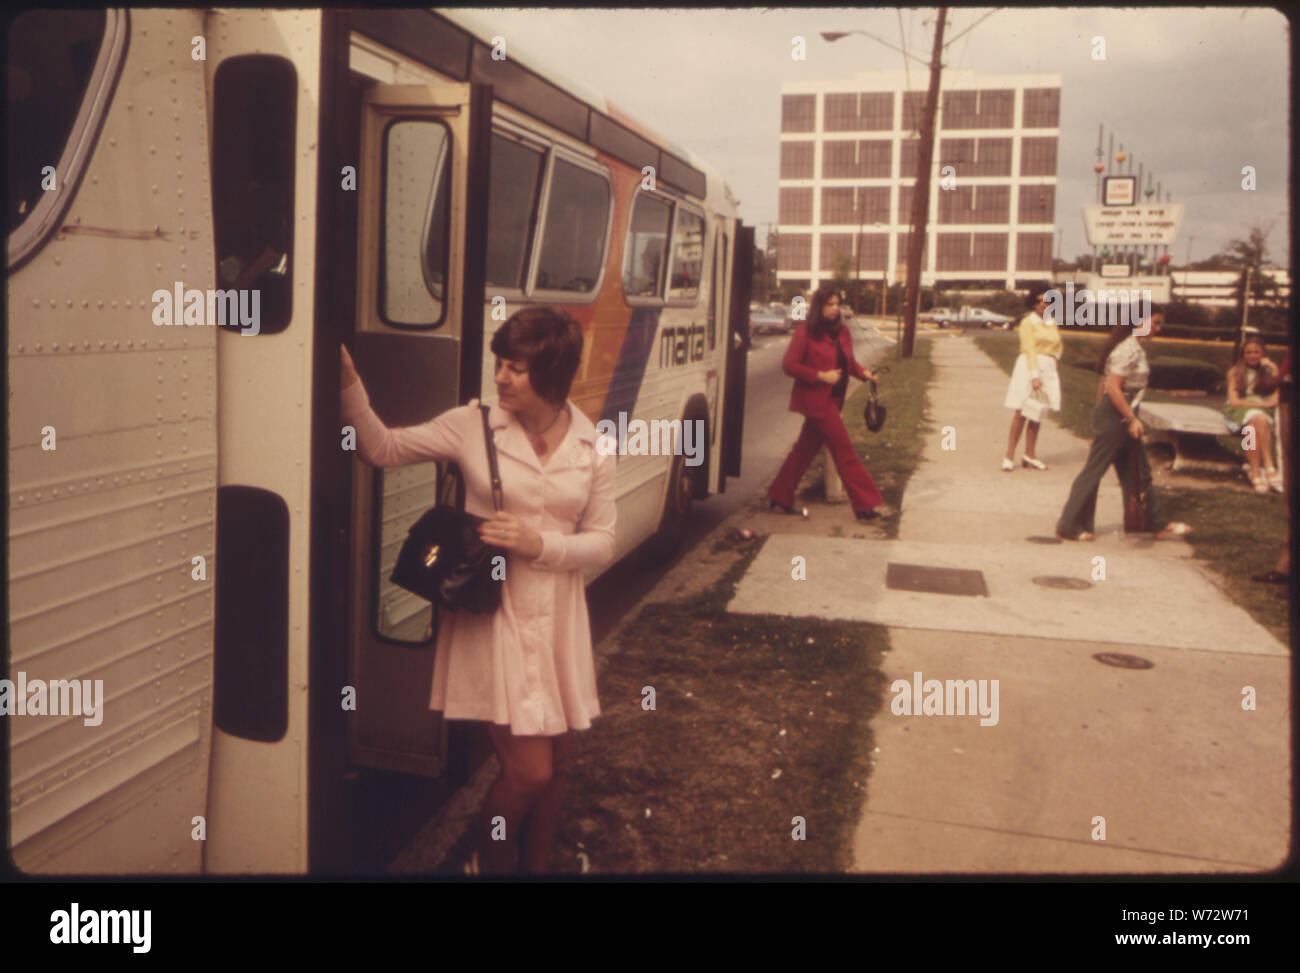 PASSENGERS LEAVING A METROPOLITAN ATLANTA RAPID TRANSIT AUTHORITY (MARTA) BUS IN ATLANTA, GEORGIA. RIDERSHIP IN 1974 WAS 73,727,000, AN INCREASE OF 27 PERCENT FROM 1970. MOST OF THE INCREASE CAME FROM PERSONS WHO HAD NEVER BEFORE BEEN REGULAR RIDERS ON THE SYSTEM. A FARE DECREASE FROM 40 TO 15 CENTS, NEW BUSES, NEW ROUTES NIGHT SERVICE, IMPROVED INFORMATION SERVICE AND FRINGE PARKING WERE REASONS FOR THE PASSENGER INCREASE Stock Photo